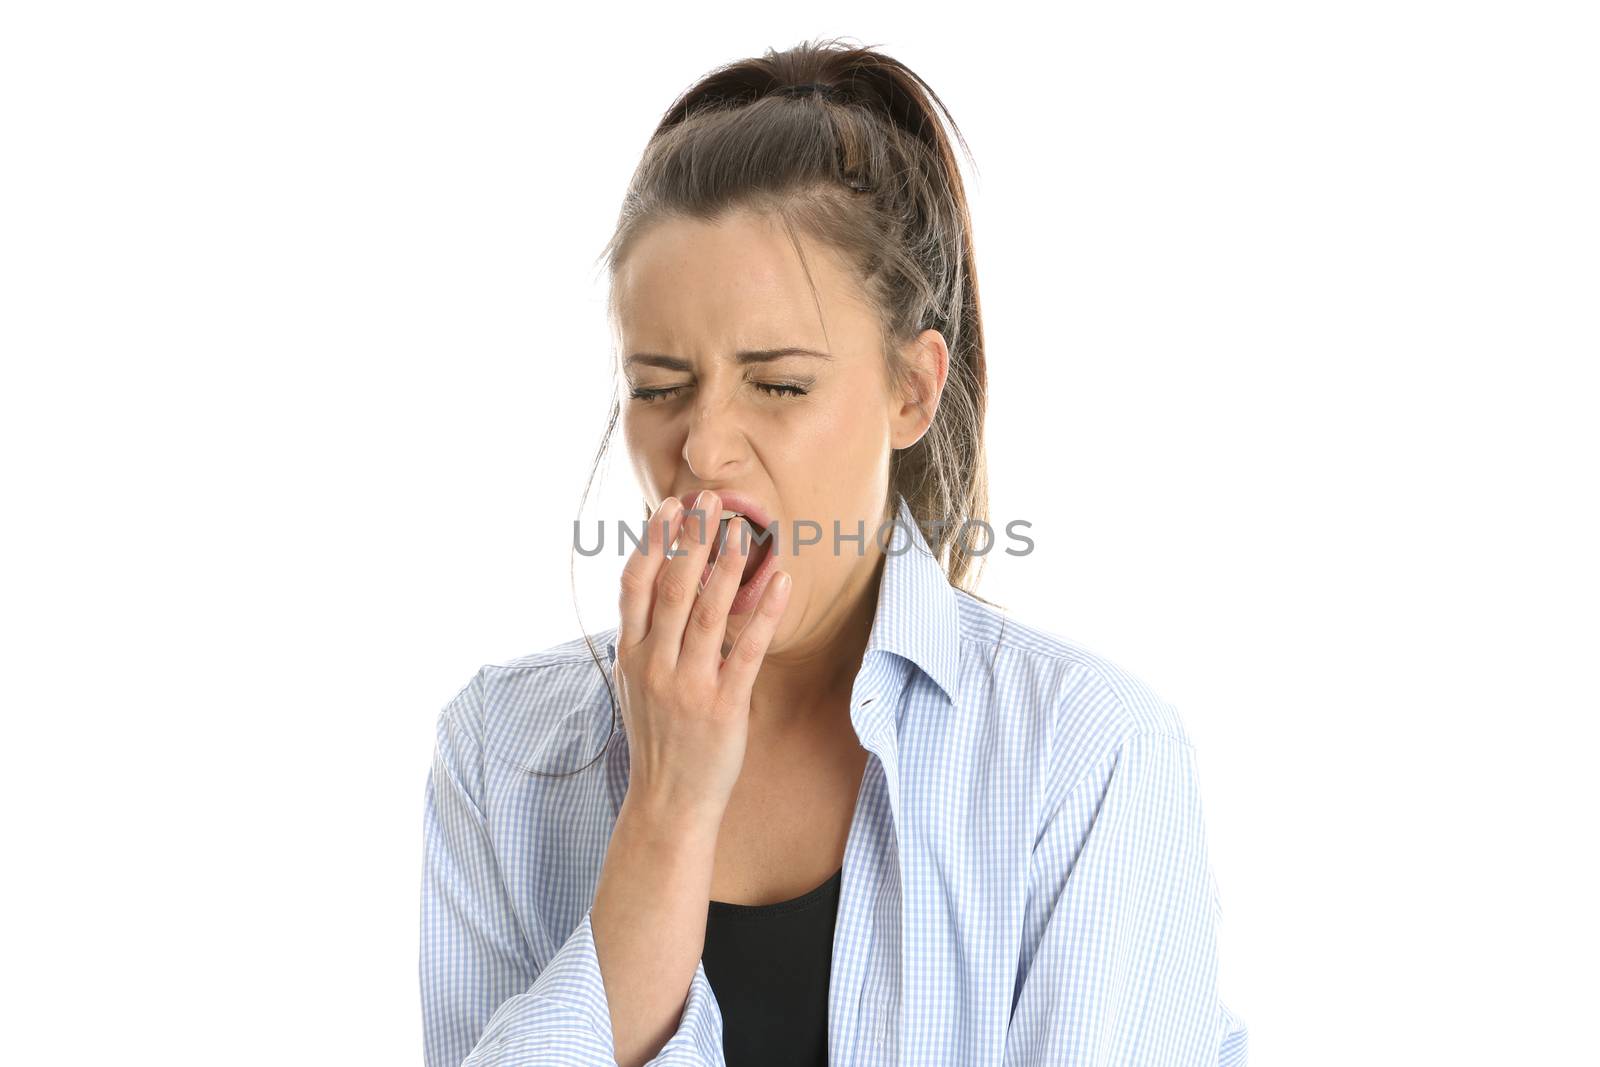 Model Released. Woman Yawning